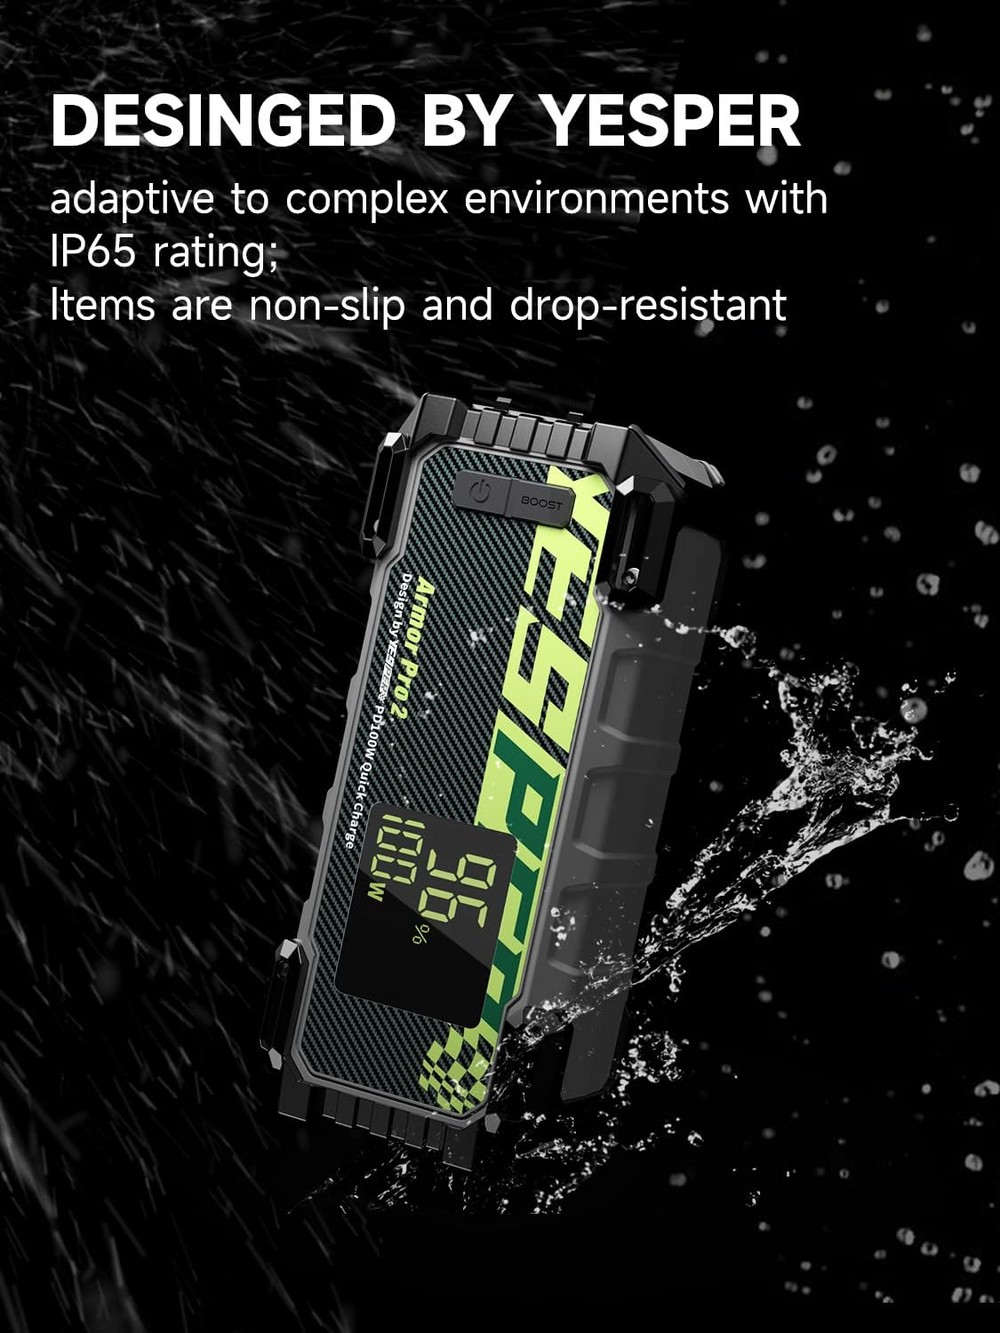 Yesper ARMOR-PRO-2 Jump Starter Battery Pack 3000A 83200mAh 140 Starts for 12V Vehicles Up To 9.5L Gas and 7.5L Diesel Engines New